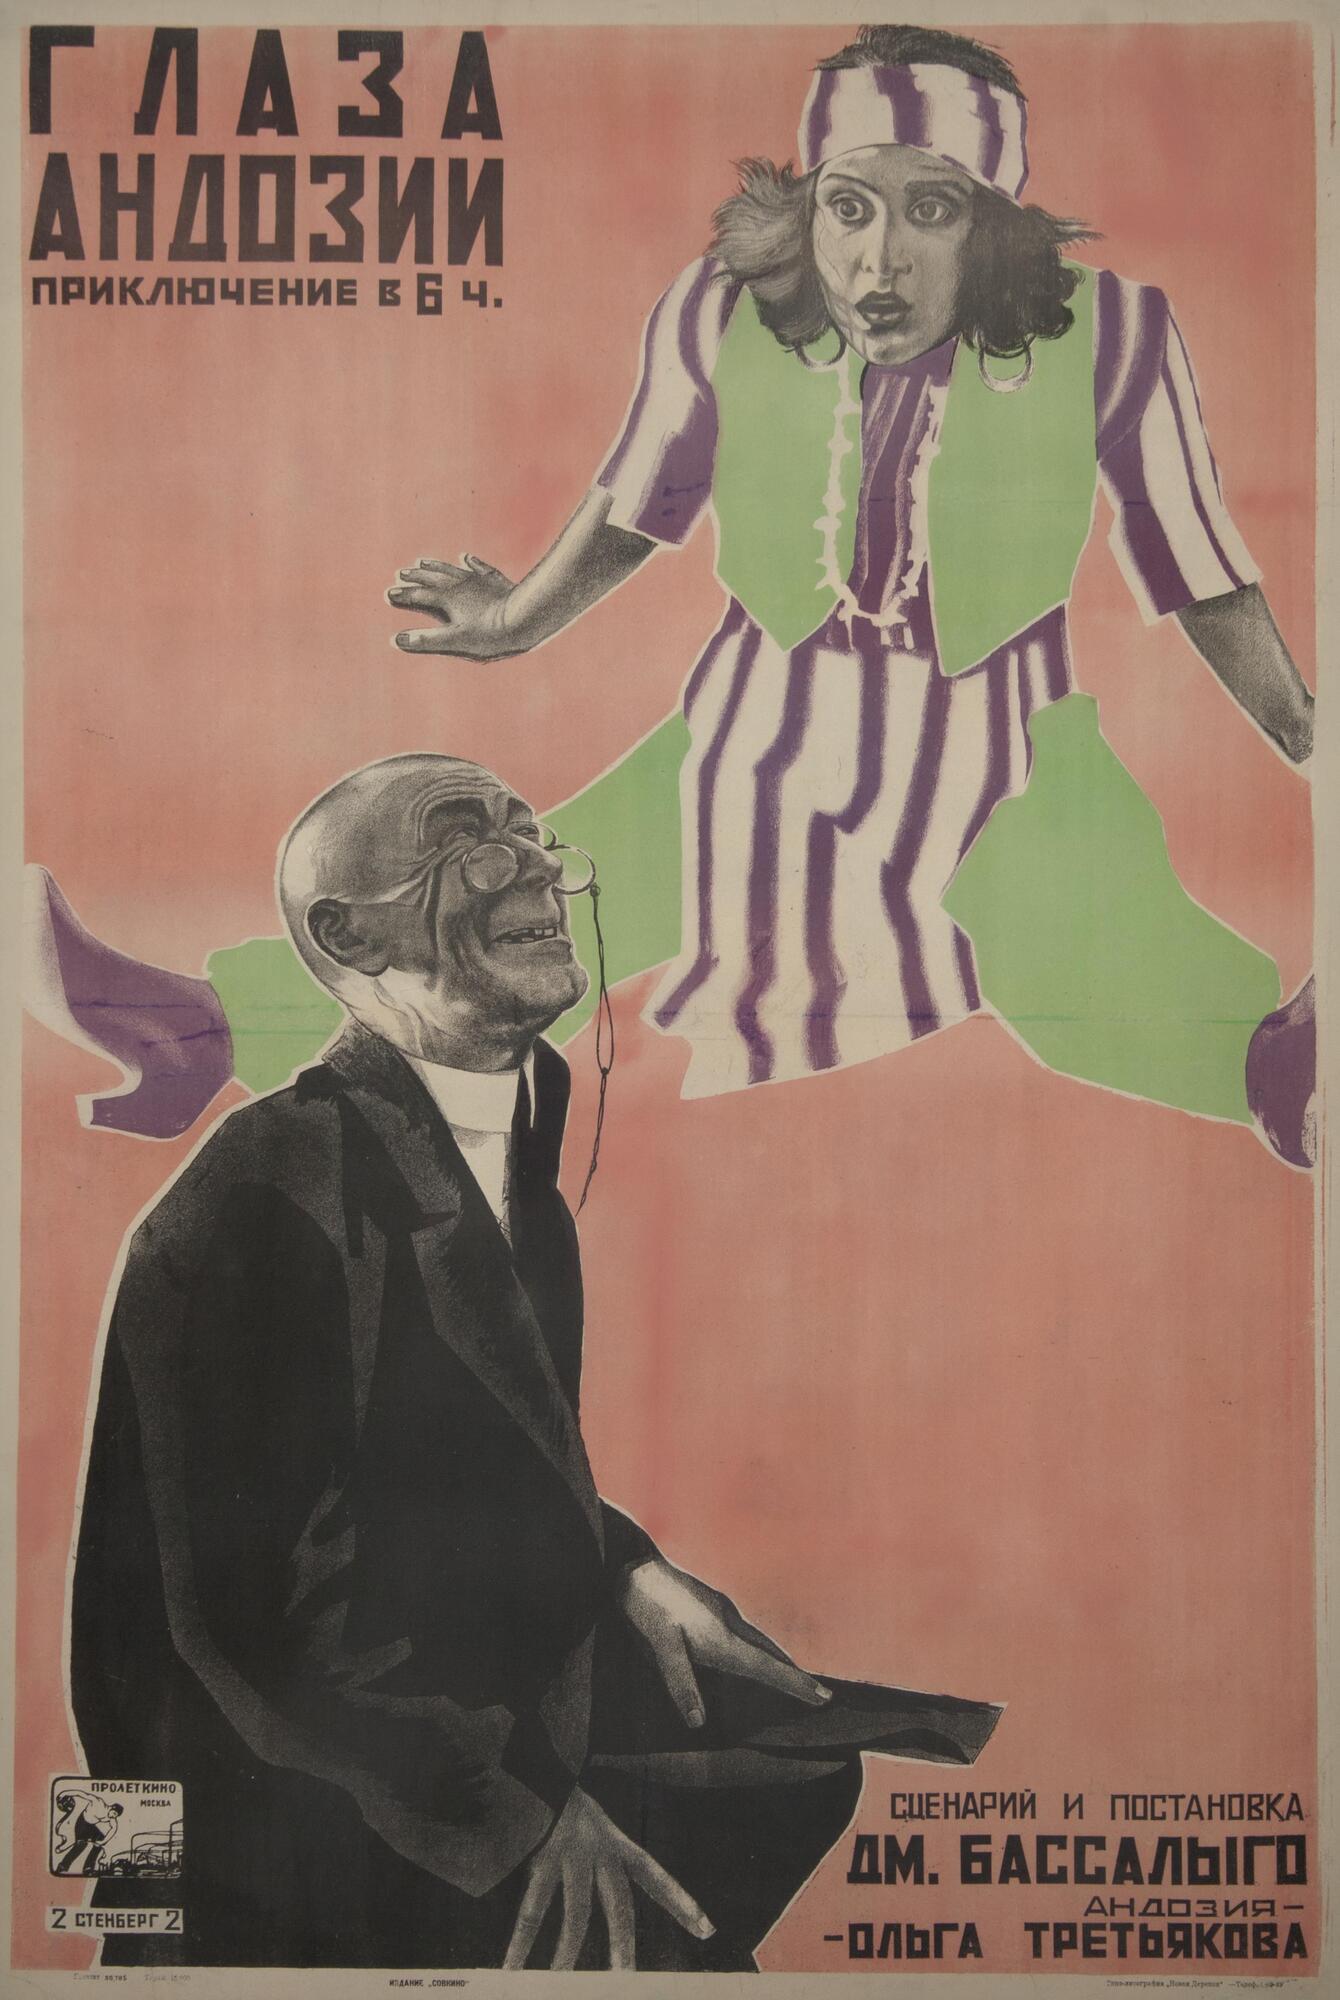 Overall white, red, green, purple and black. The image is of a woman doing a split with a shocked facial expression. Her outfit is green with a purple and white stripe. On the left side there is an older man in a black suit wearing glasses smiling.